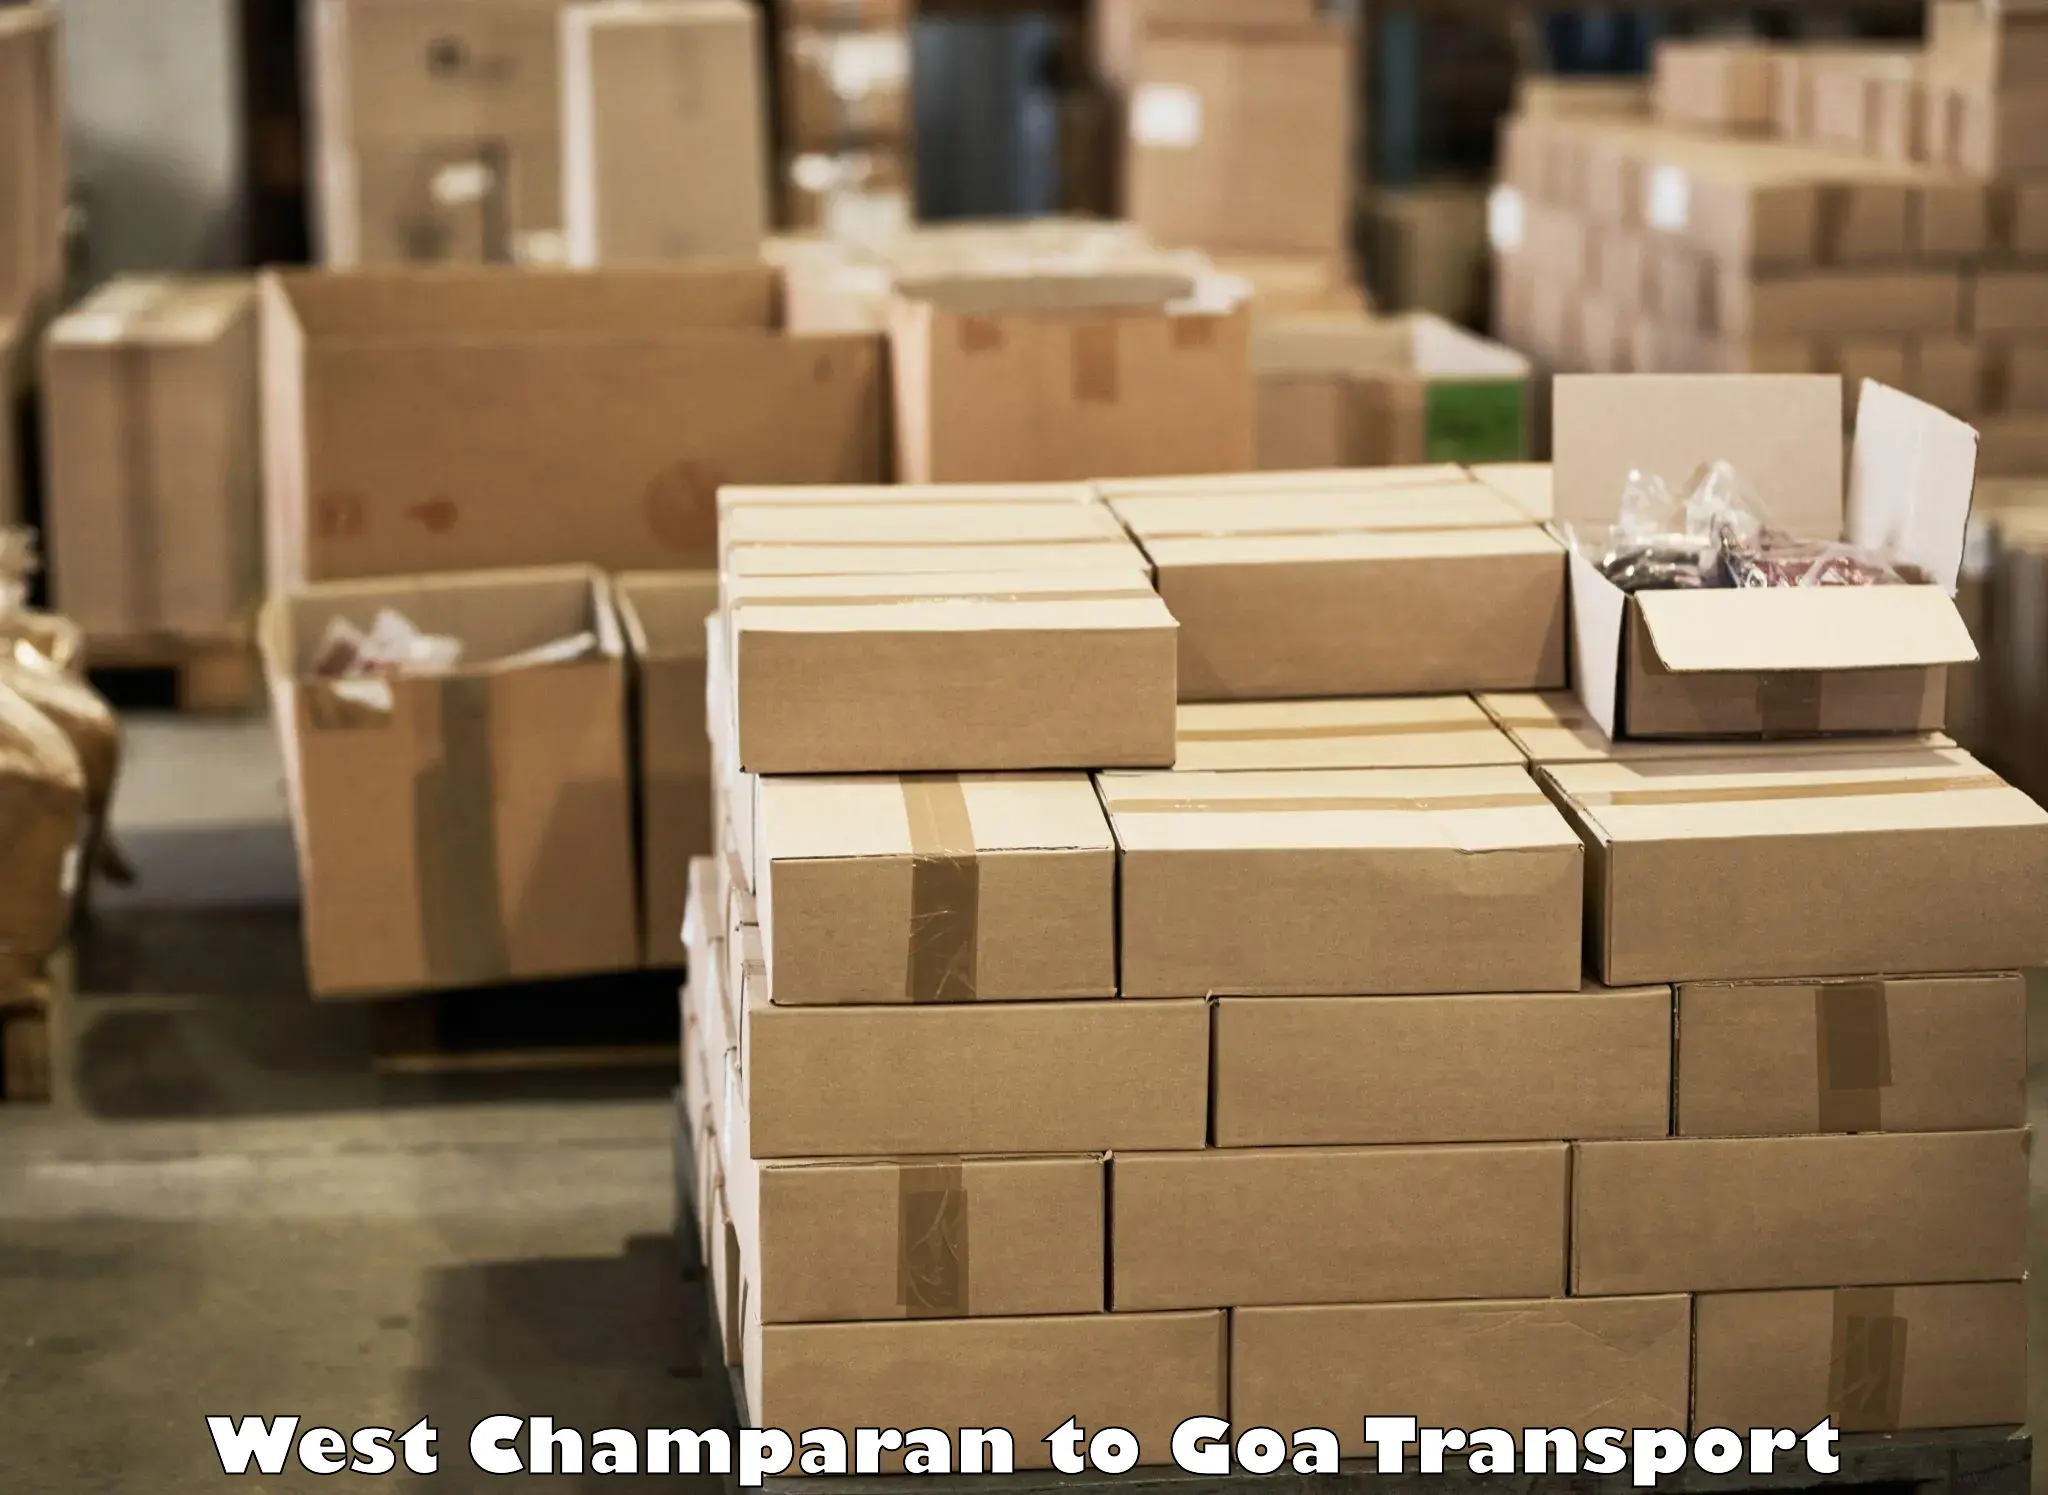 Nearby transport service West Champaran to Goa University